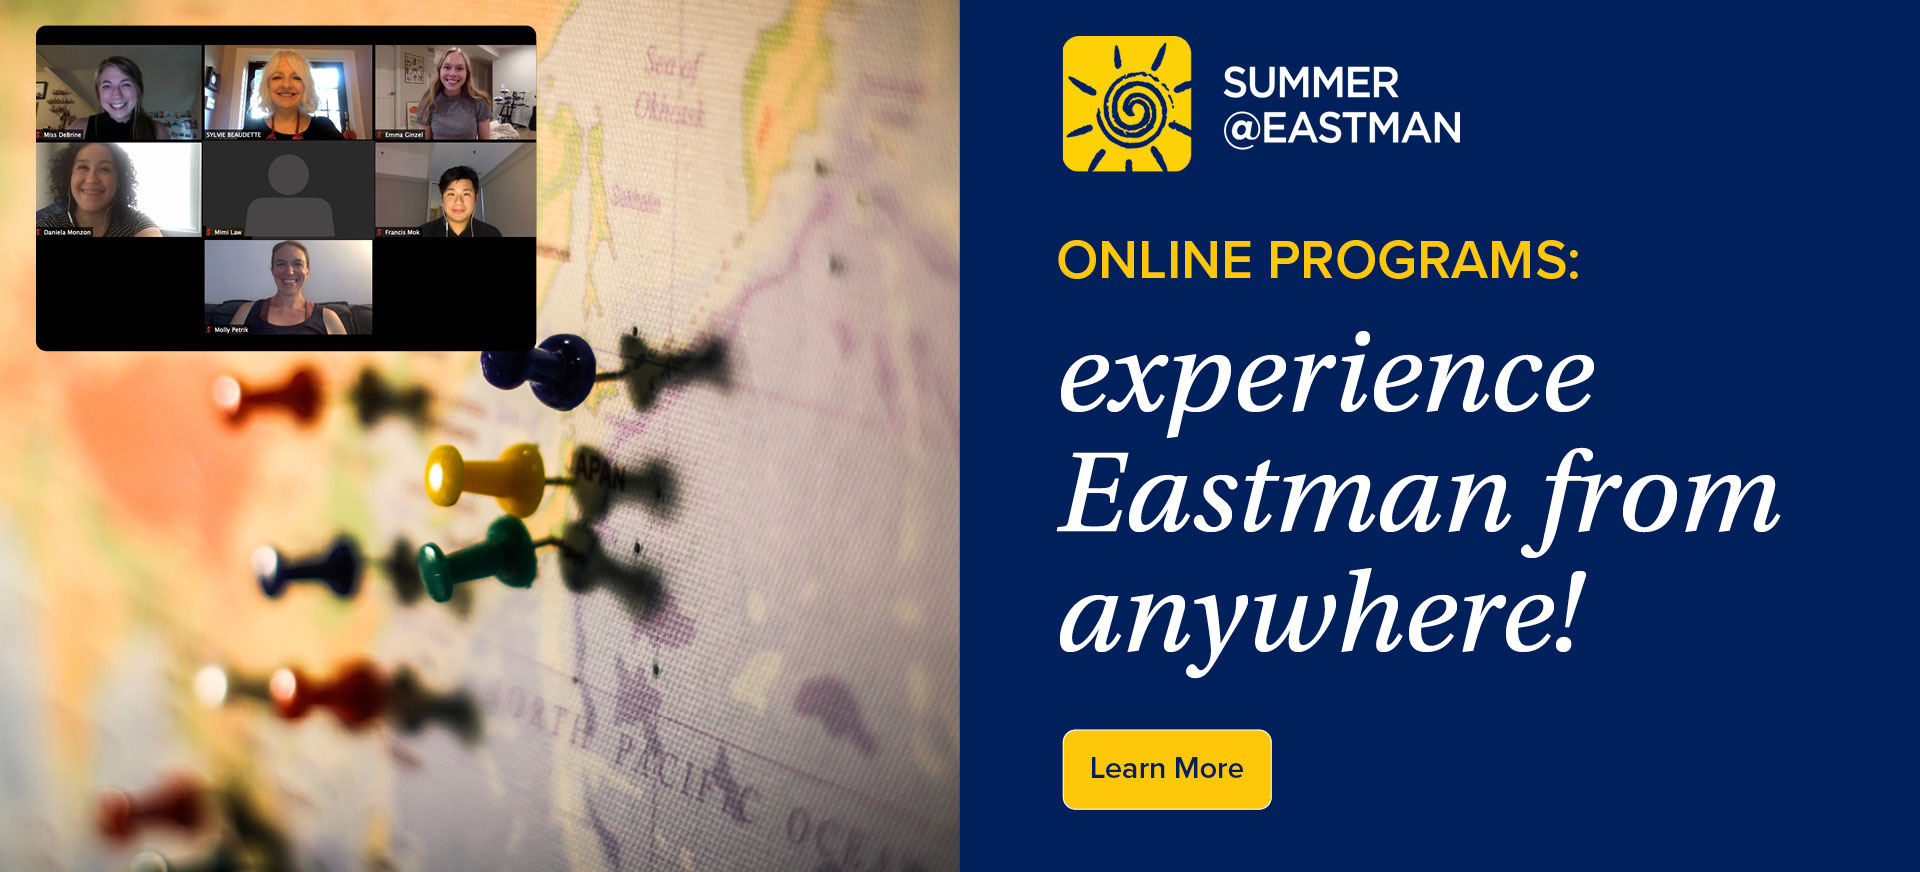 Online Programs: Experience Eastman From Anywhere!